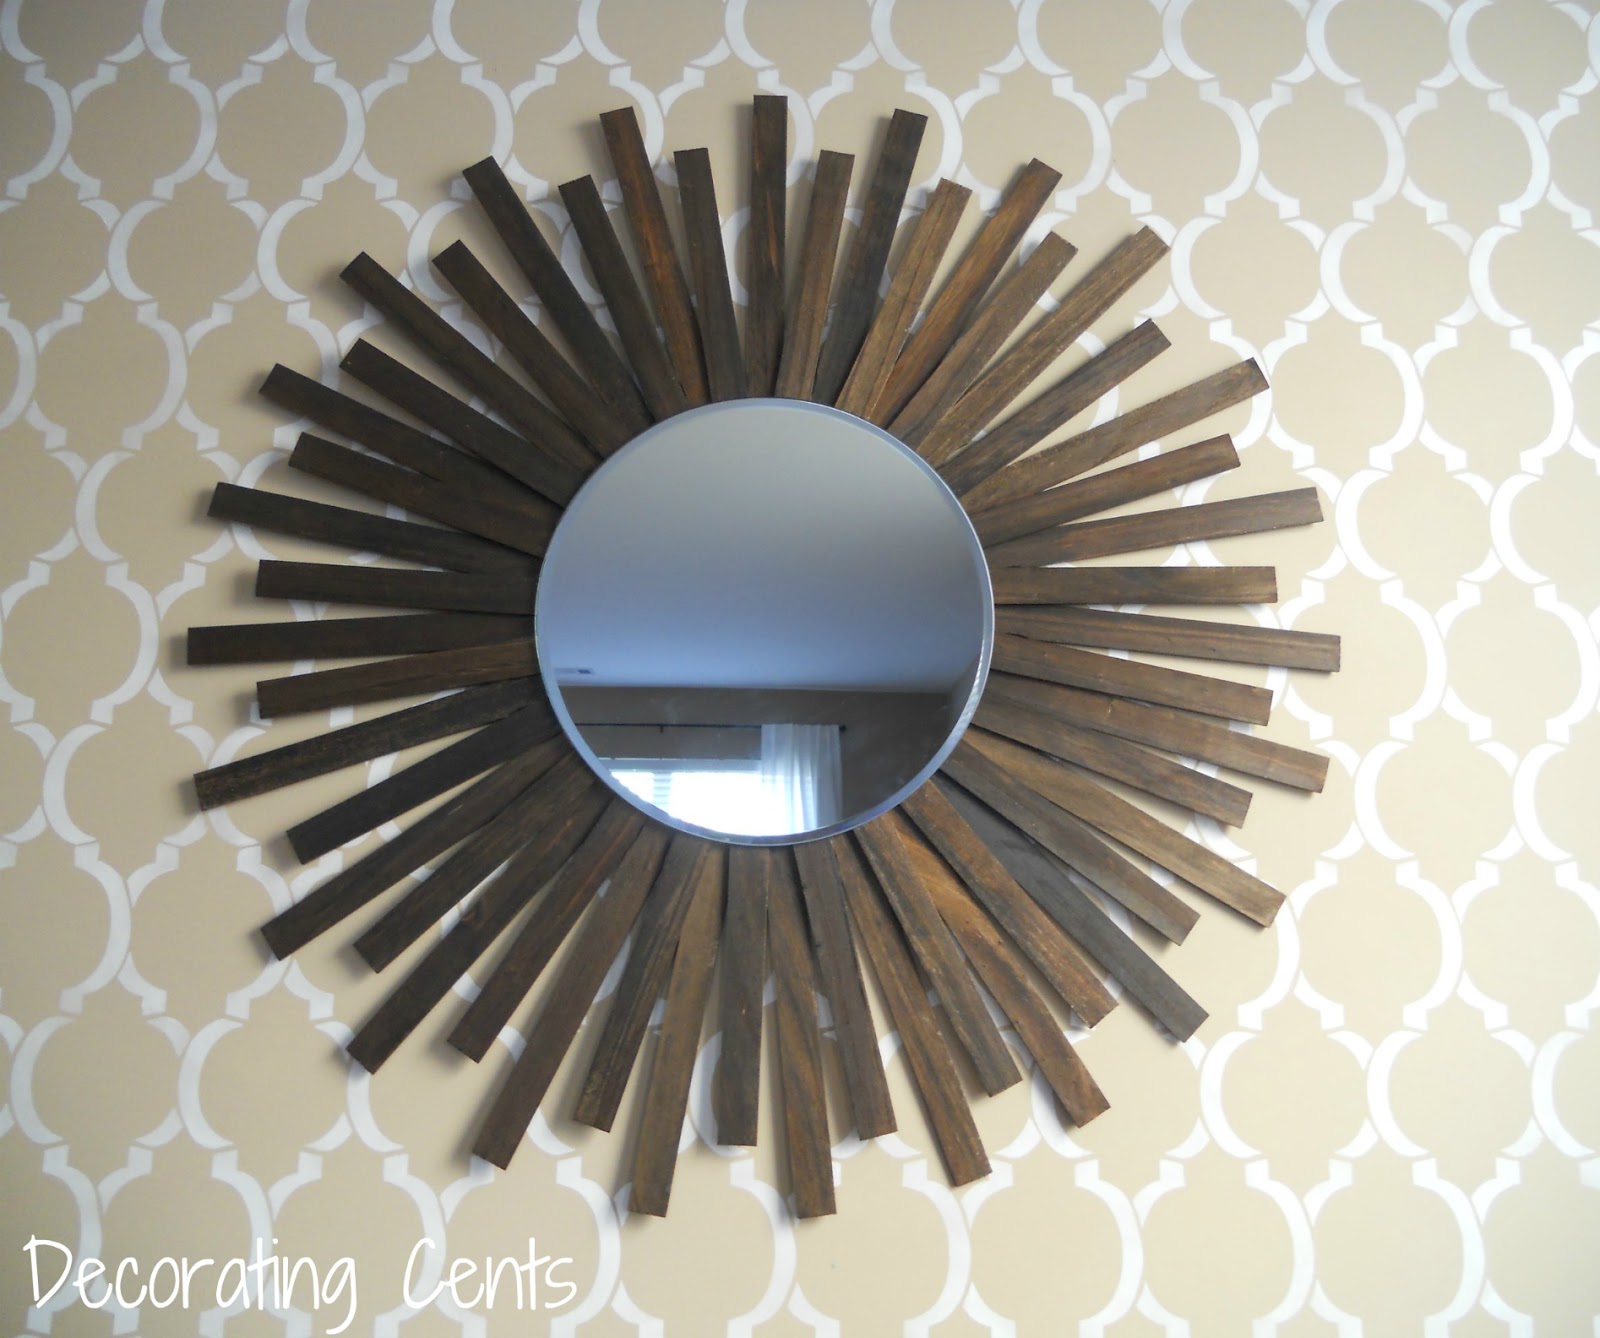 From trash to treasure: 12 incredible upcycling ideas! DIY Tricks Reuse & Recycle   